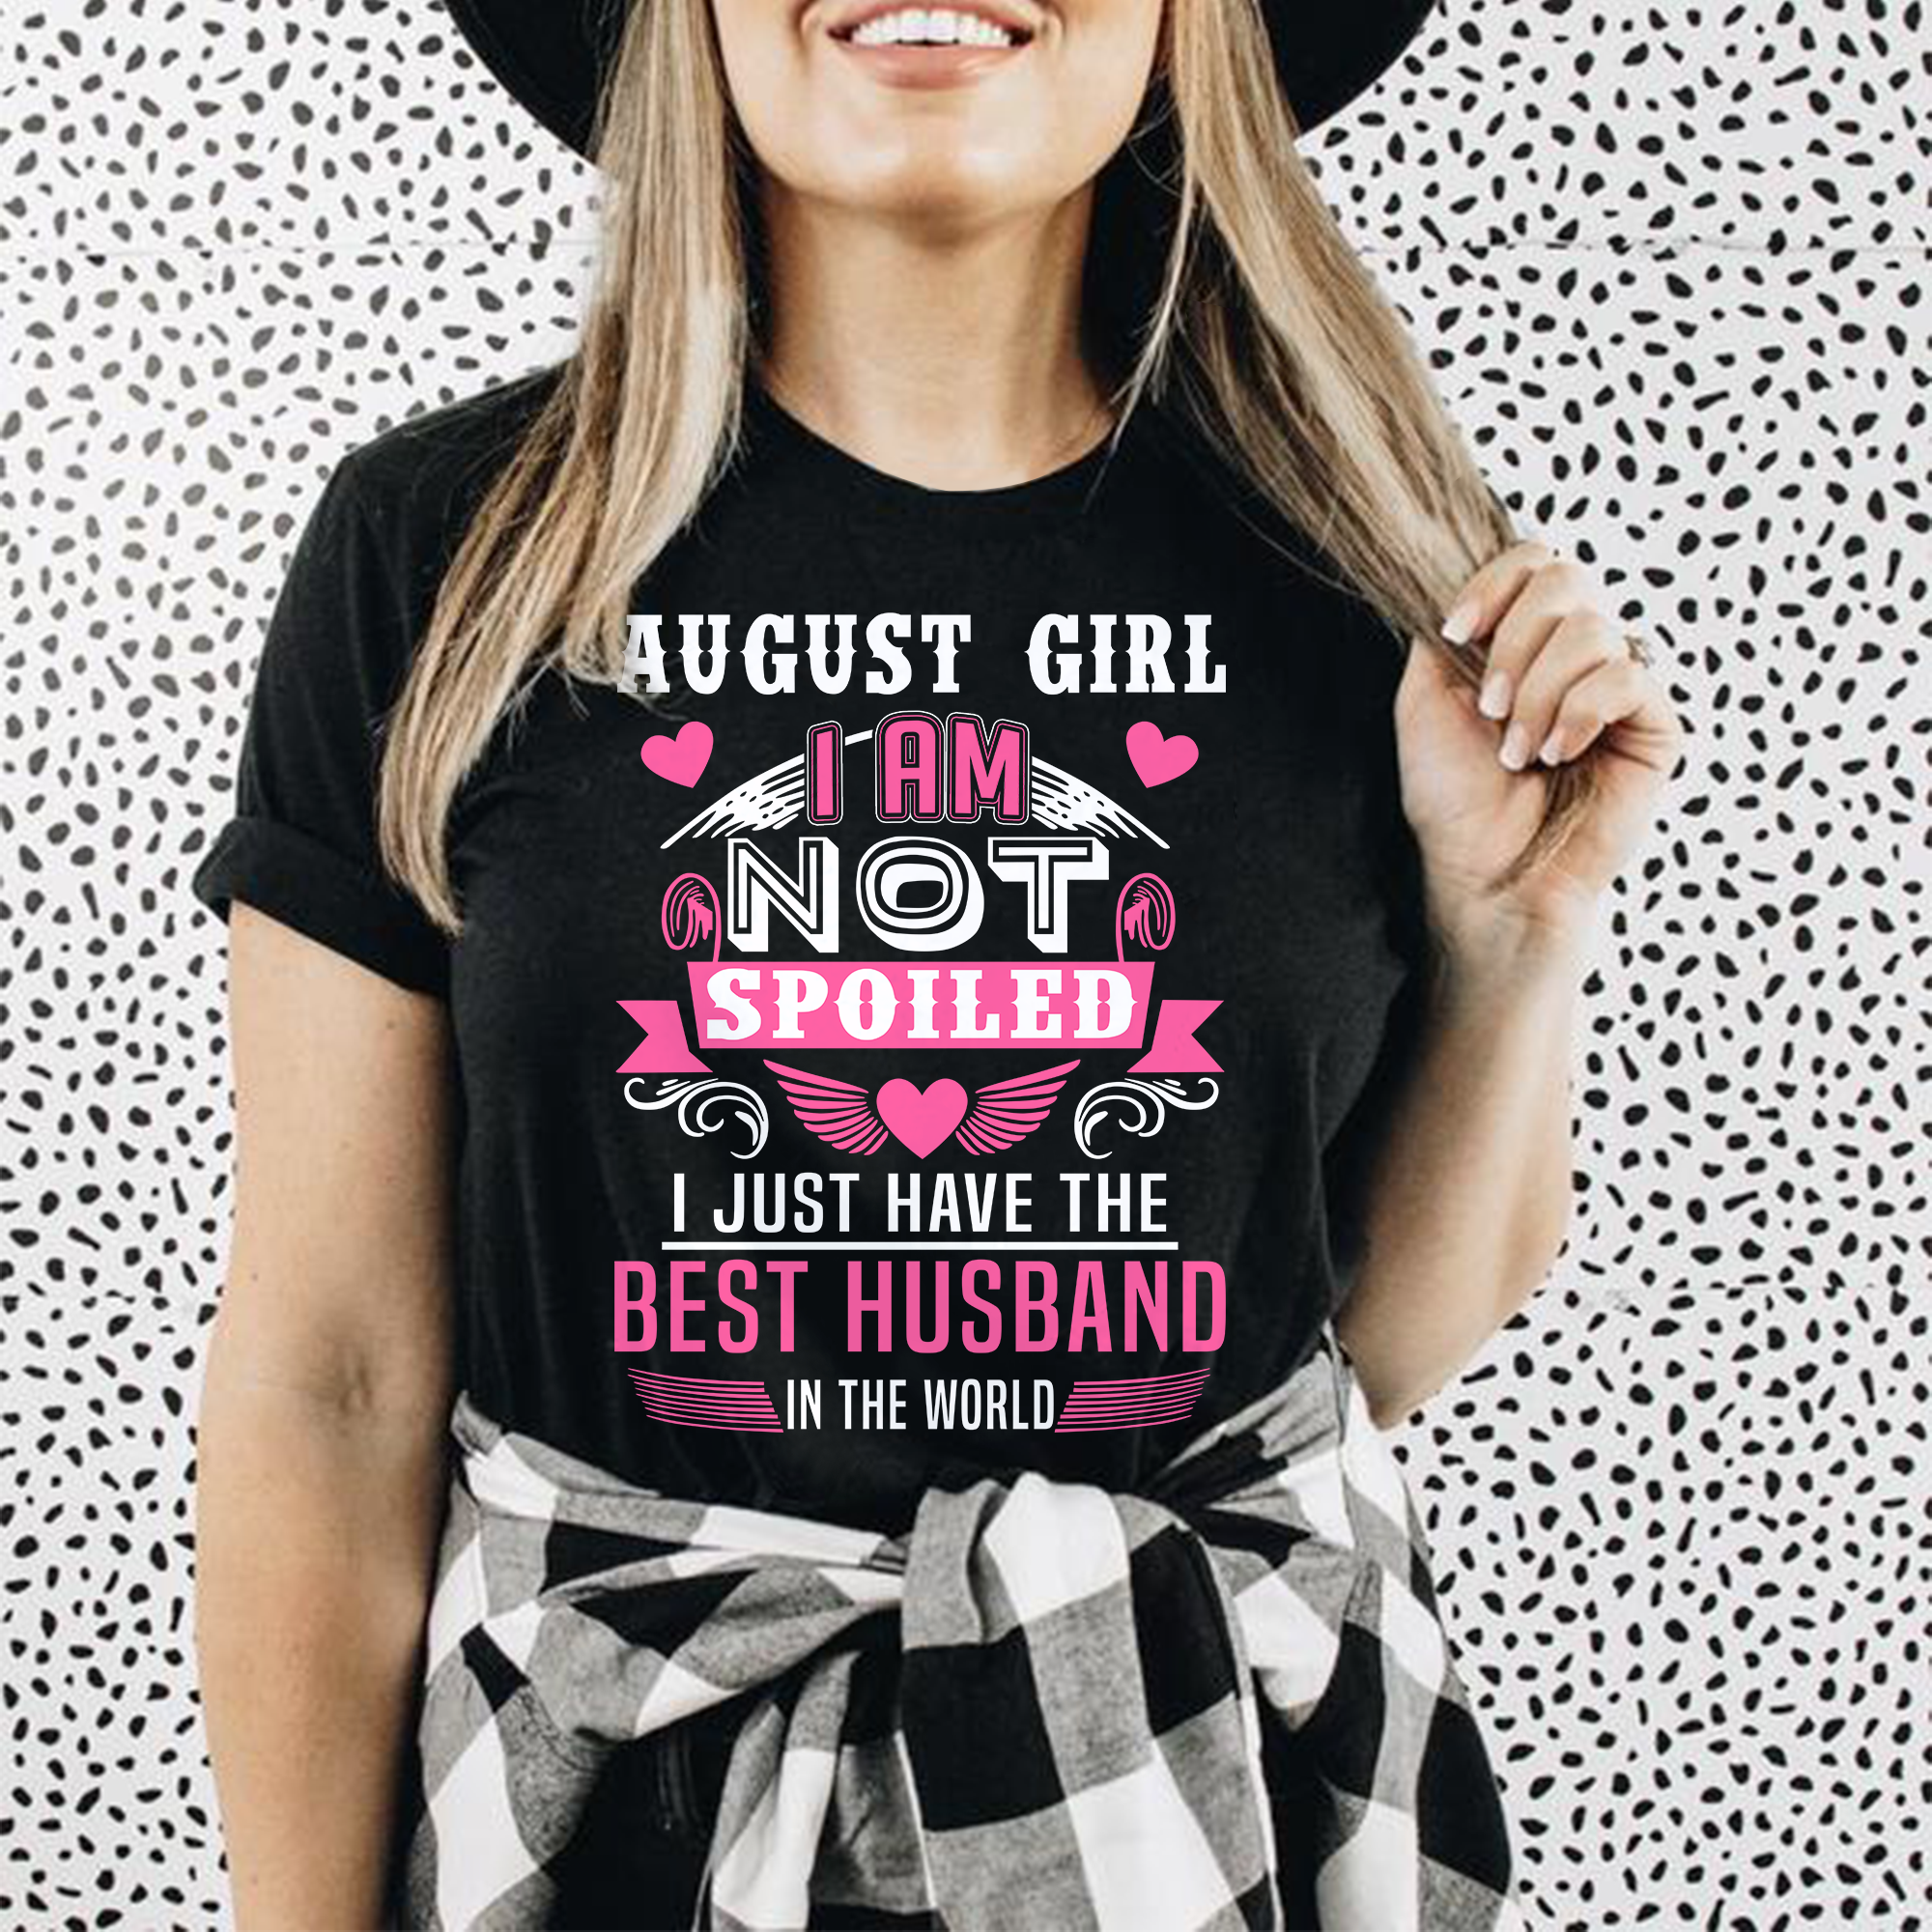 August Girl – I Just Have The Best Husband In The World T-Shirt